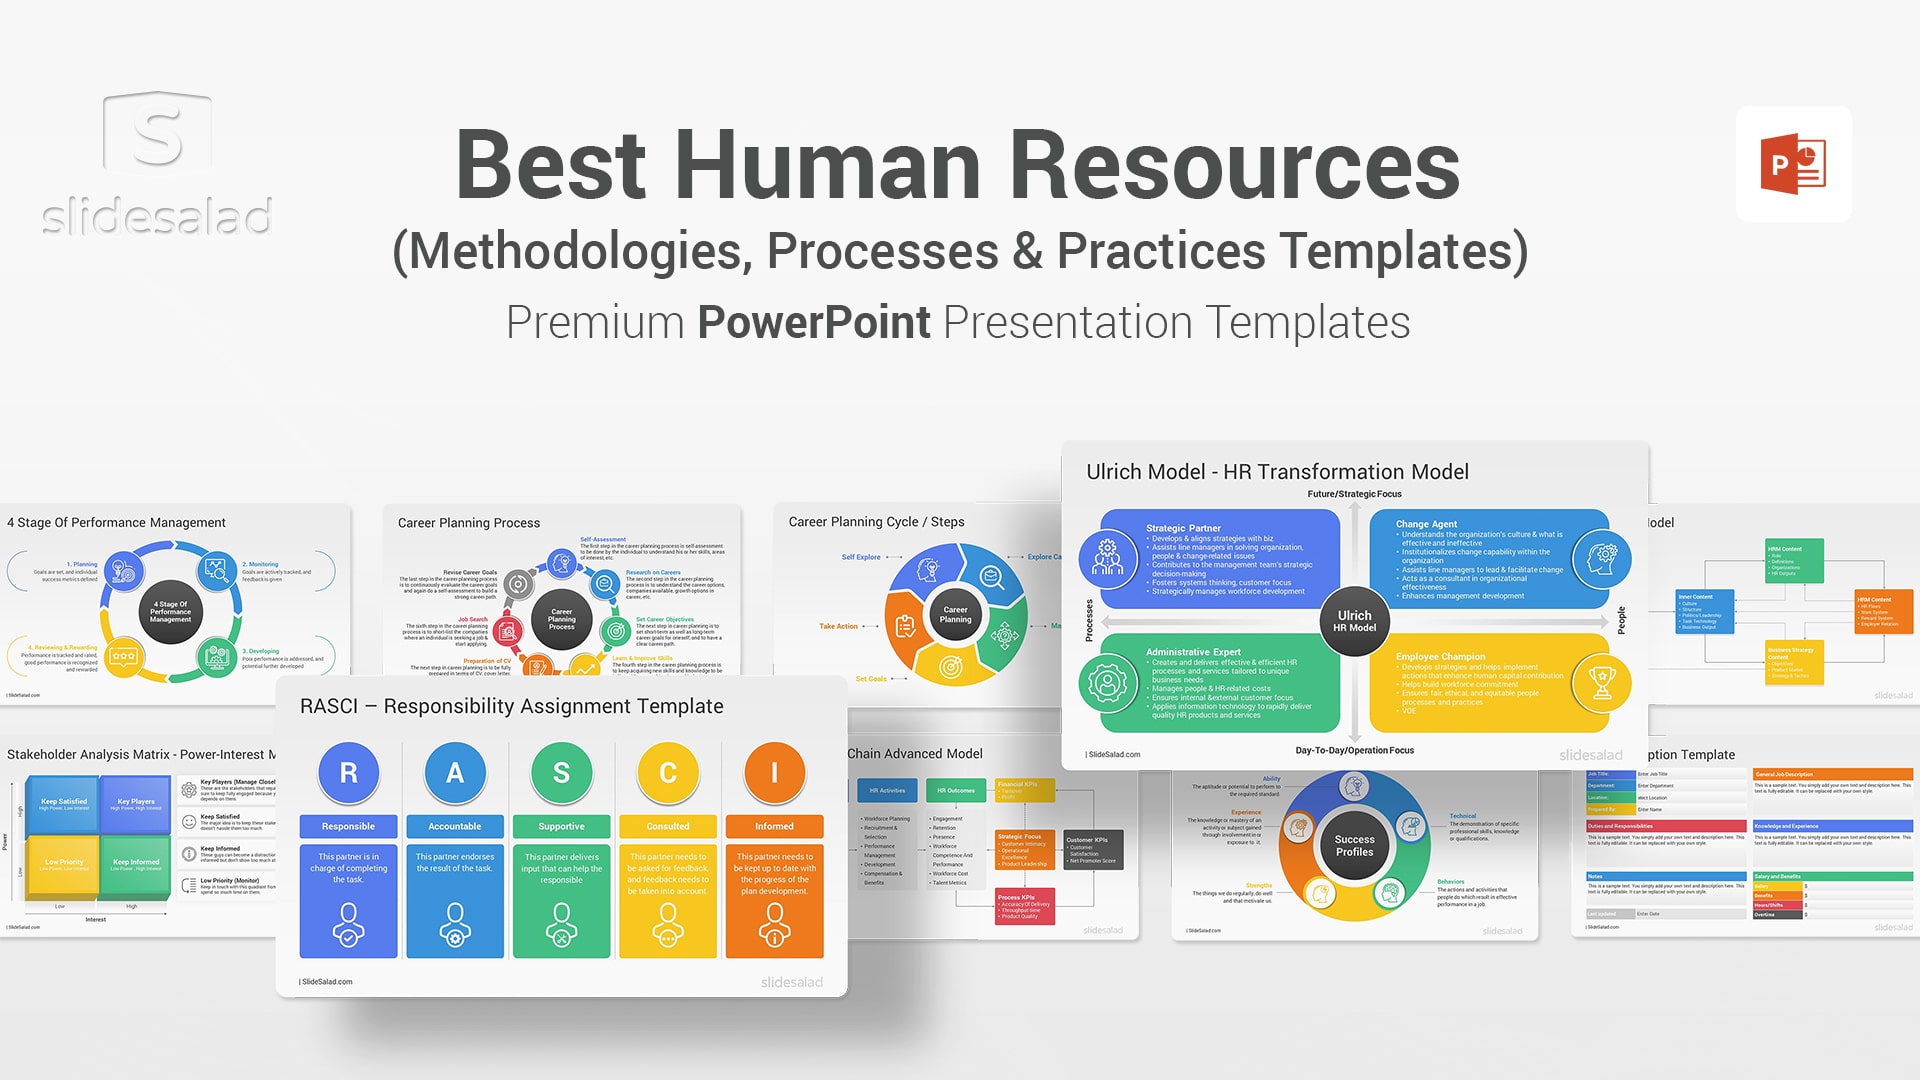 Best Human Resources Models and Practices PowerPoint Template